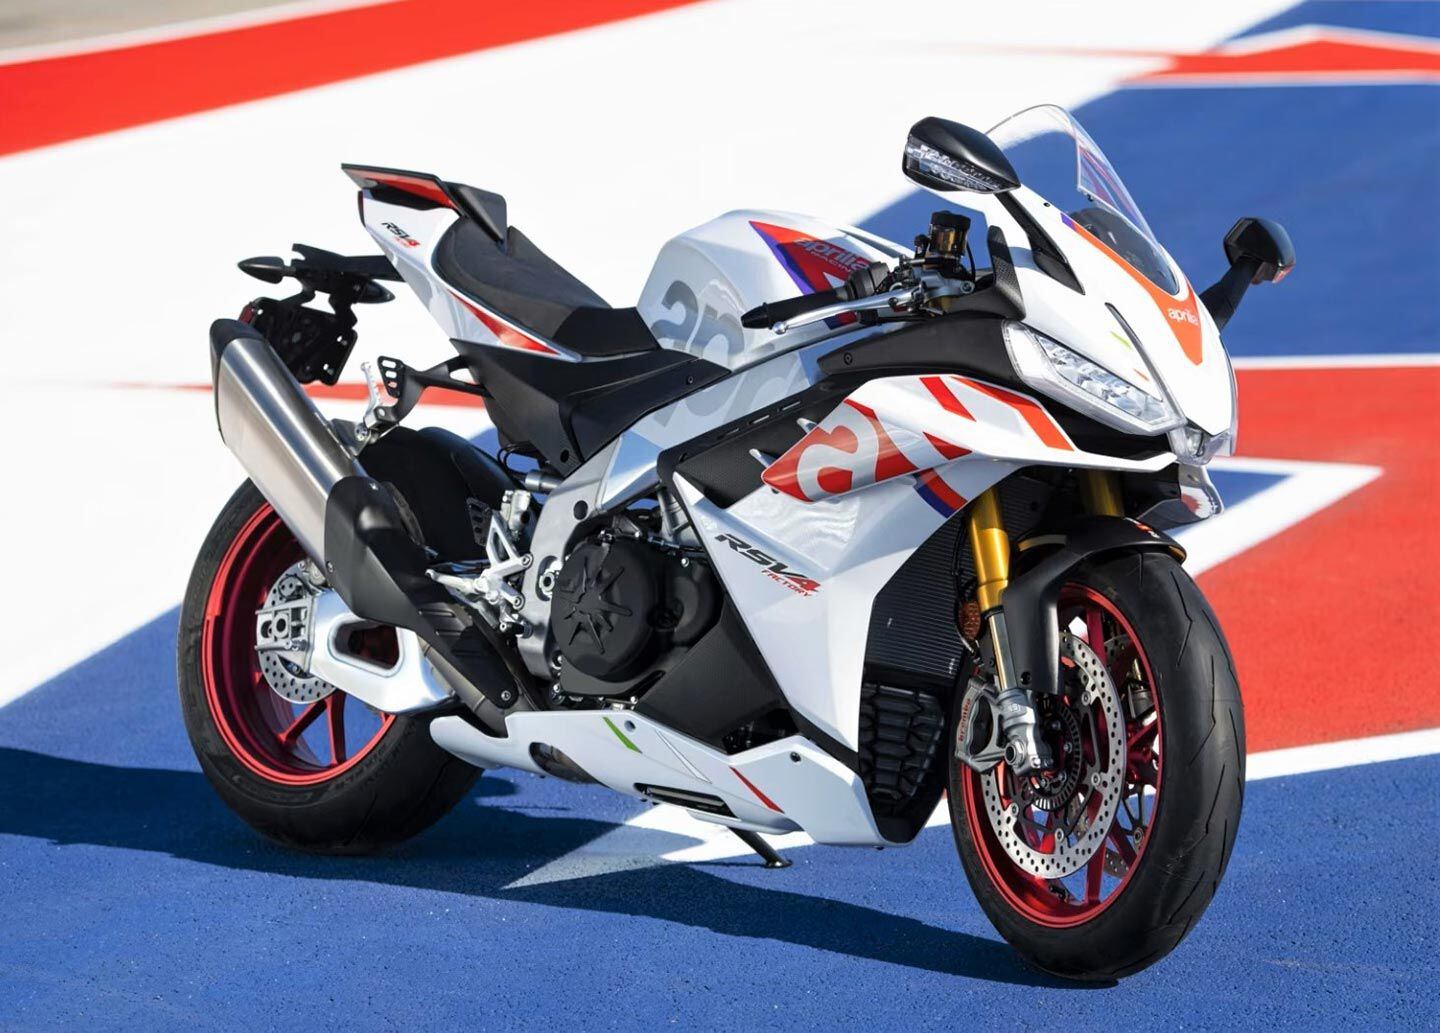 Sexy, smooth, and speedy, Aprilia’s RSV4 borrows liberally from its MotoGP race efforts to create a road-legal rocket.